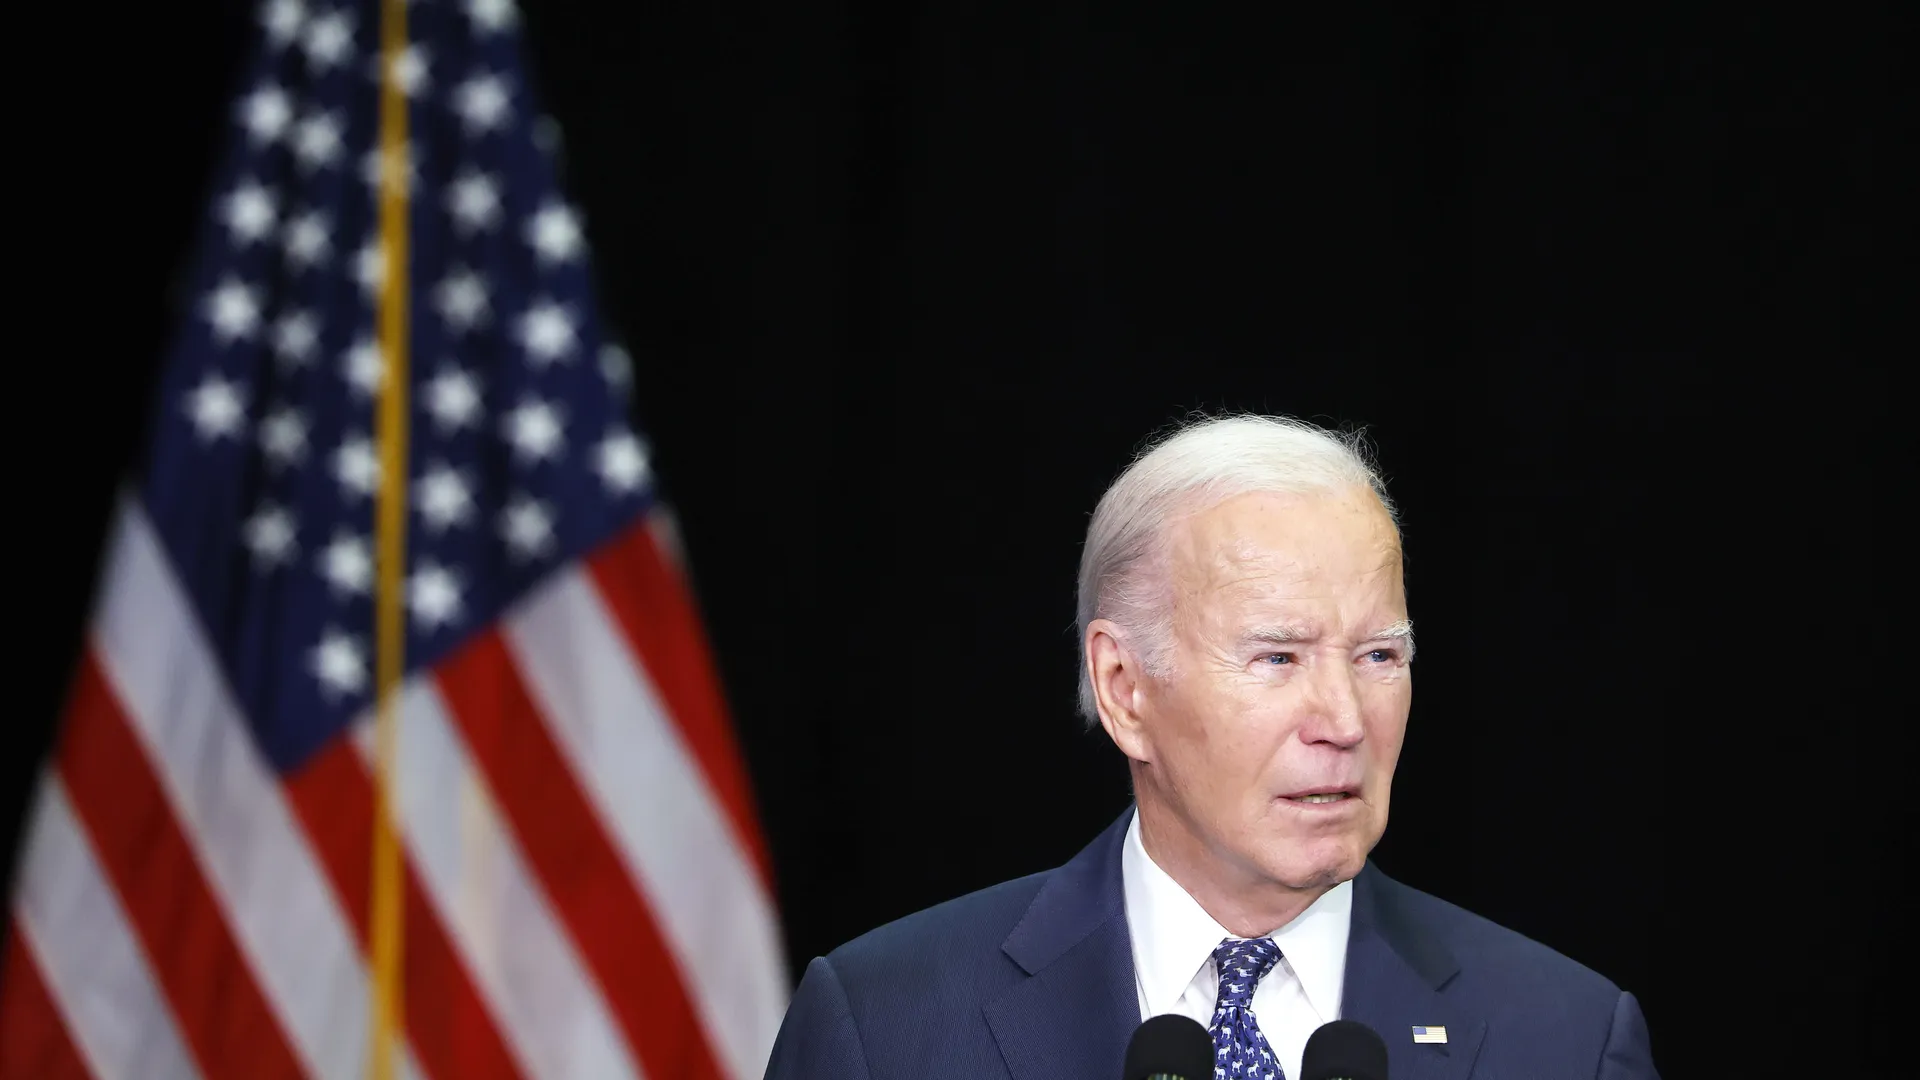 Biden's outreach underscores his campaign's efforts to broaden support (Credits: Getty Images)